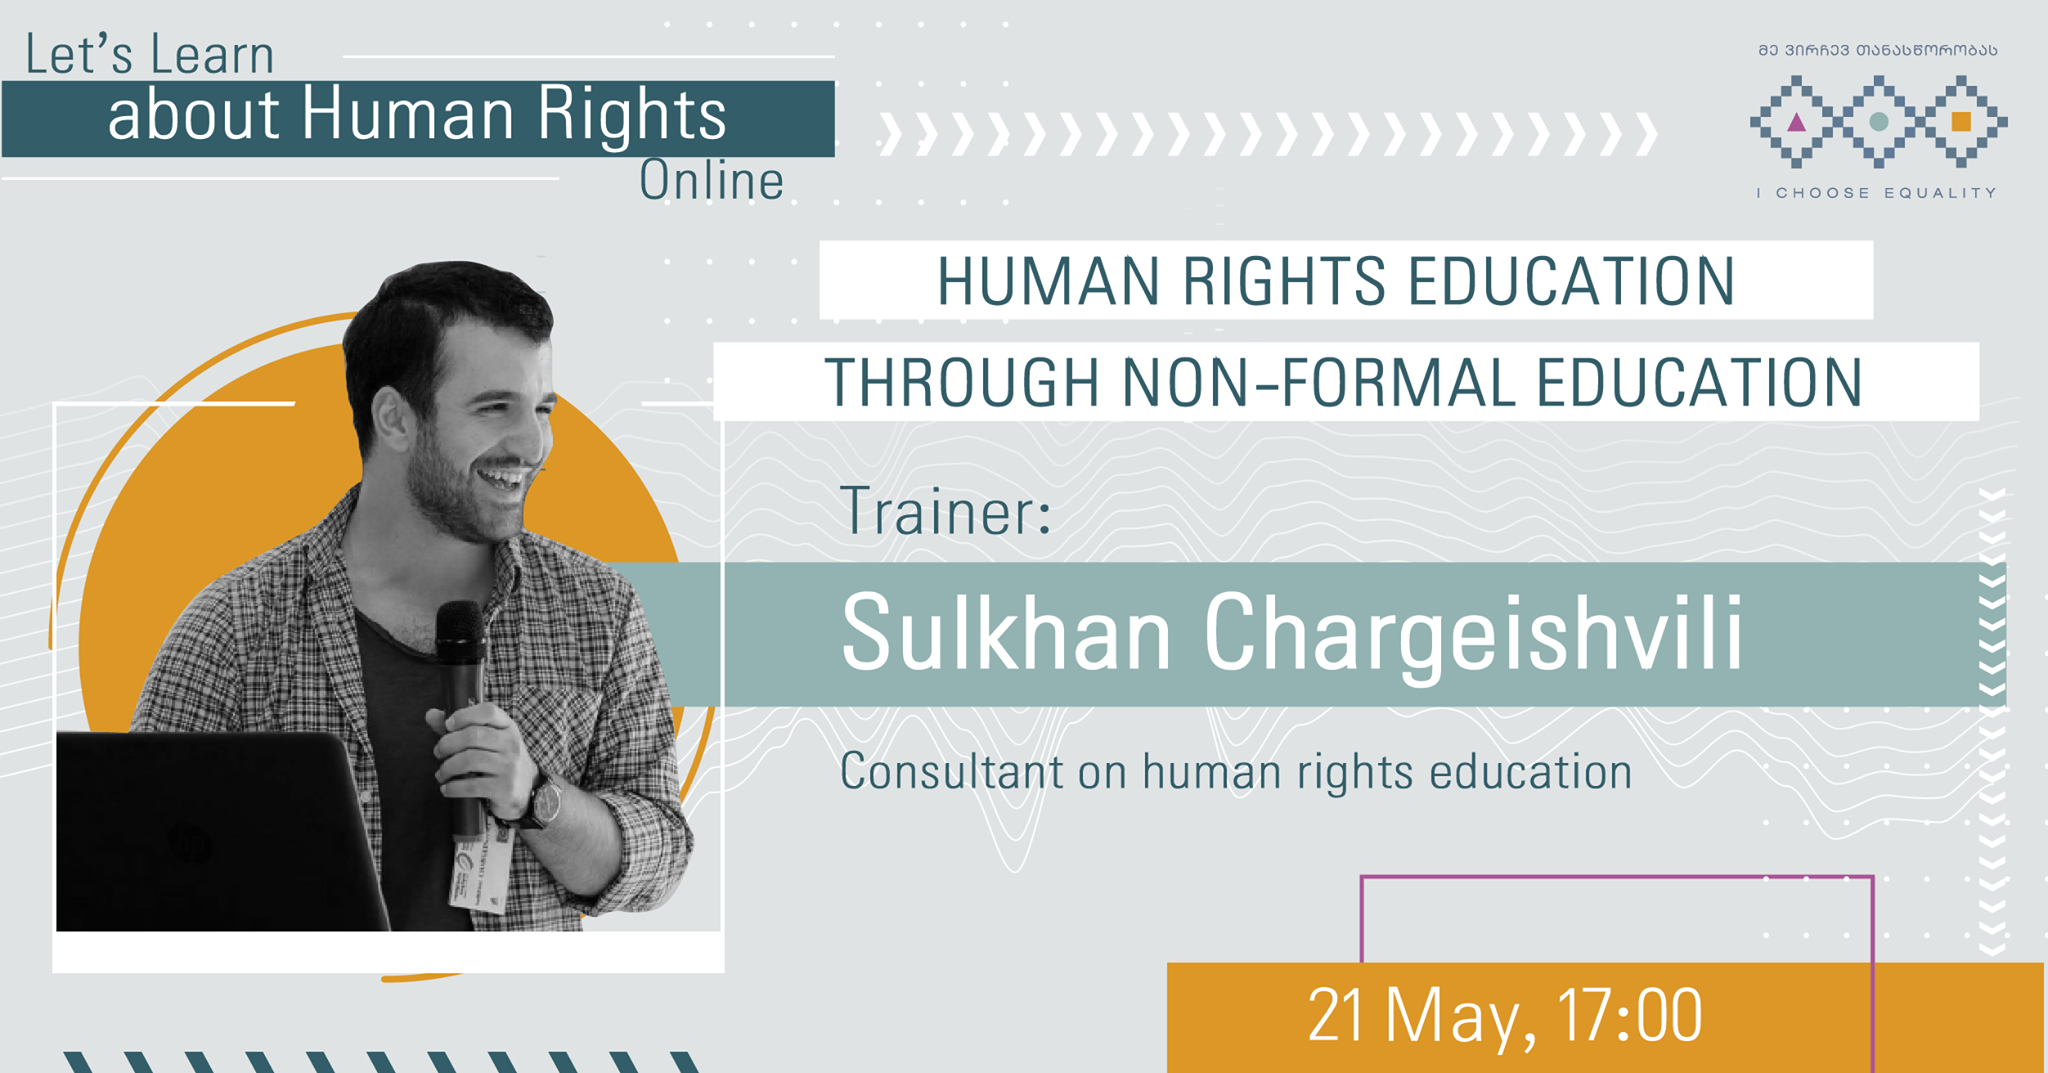 Let’s Learn about Human Rights Online – new sessions about human rights education launched